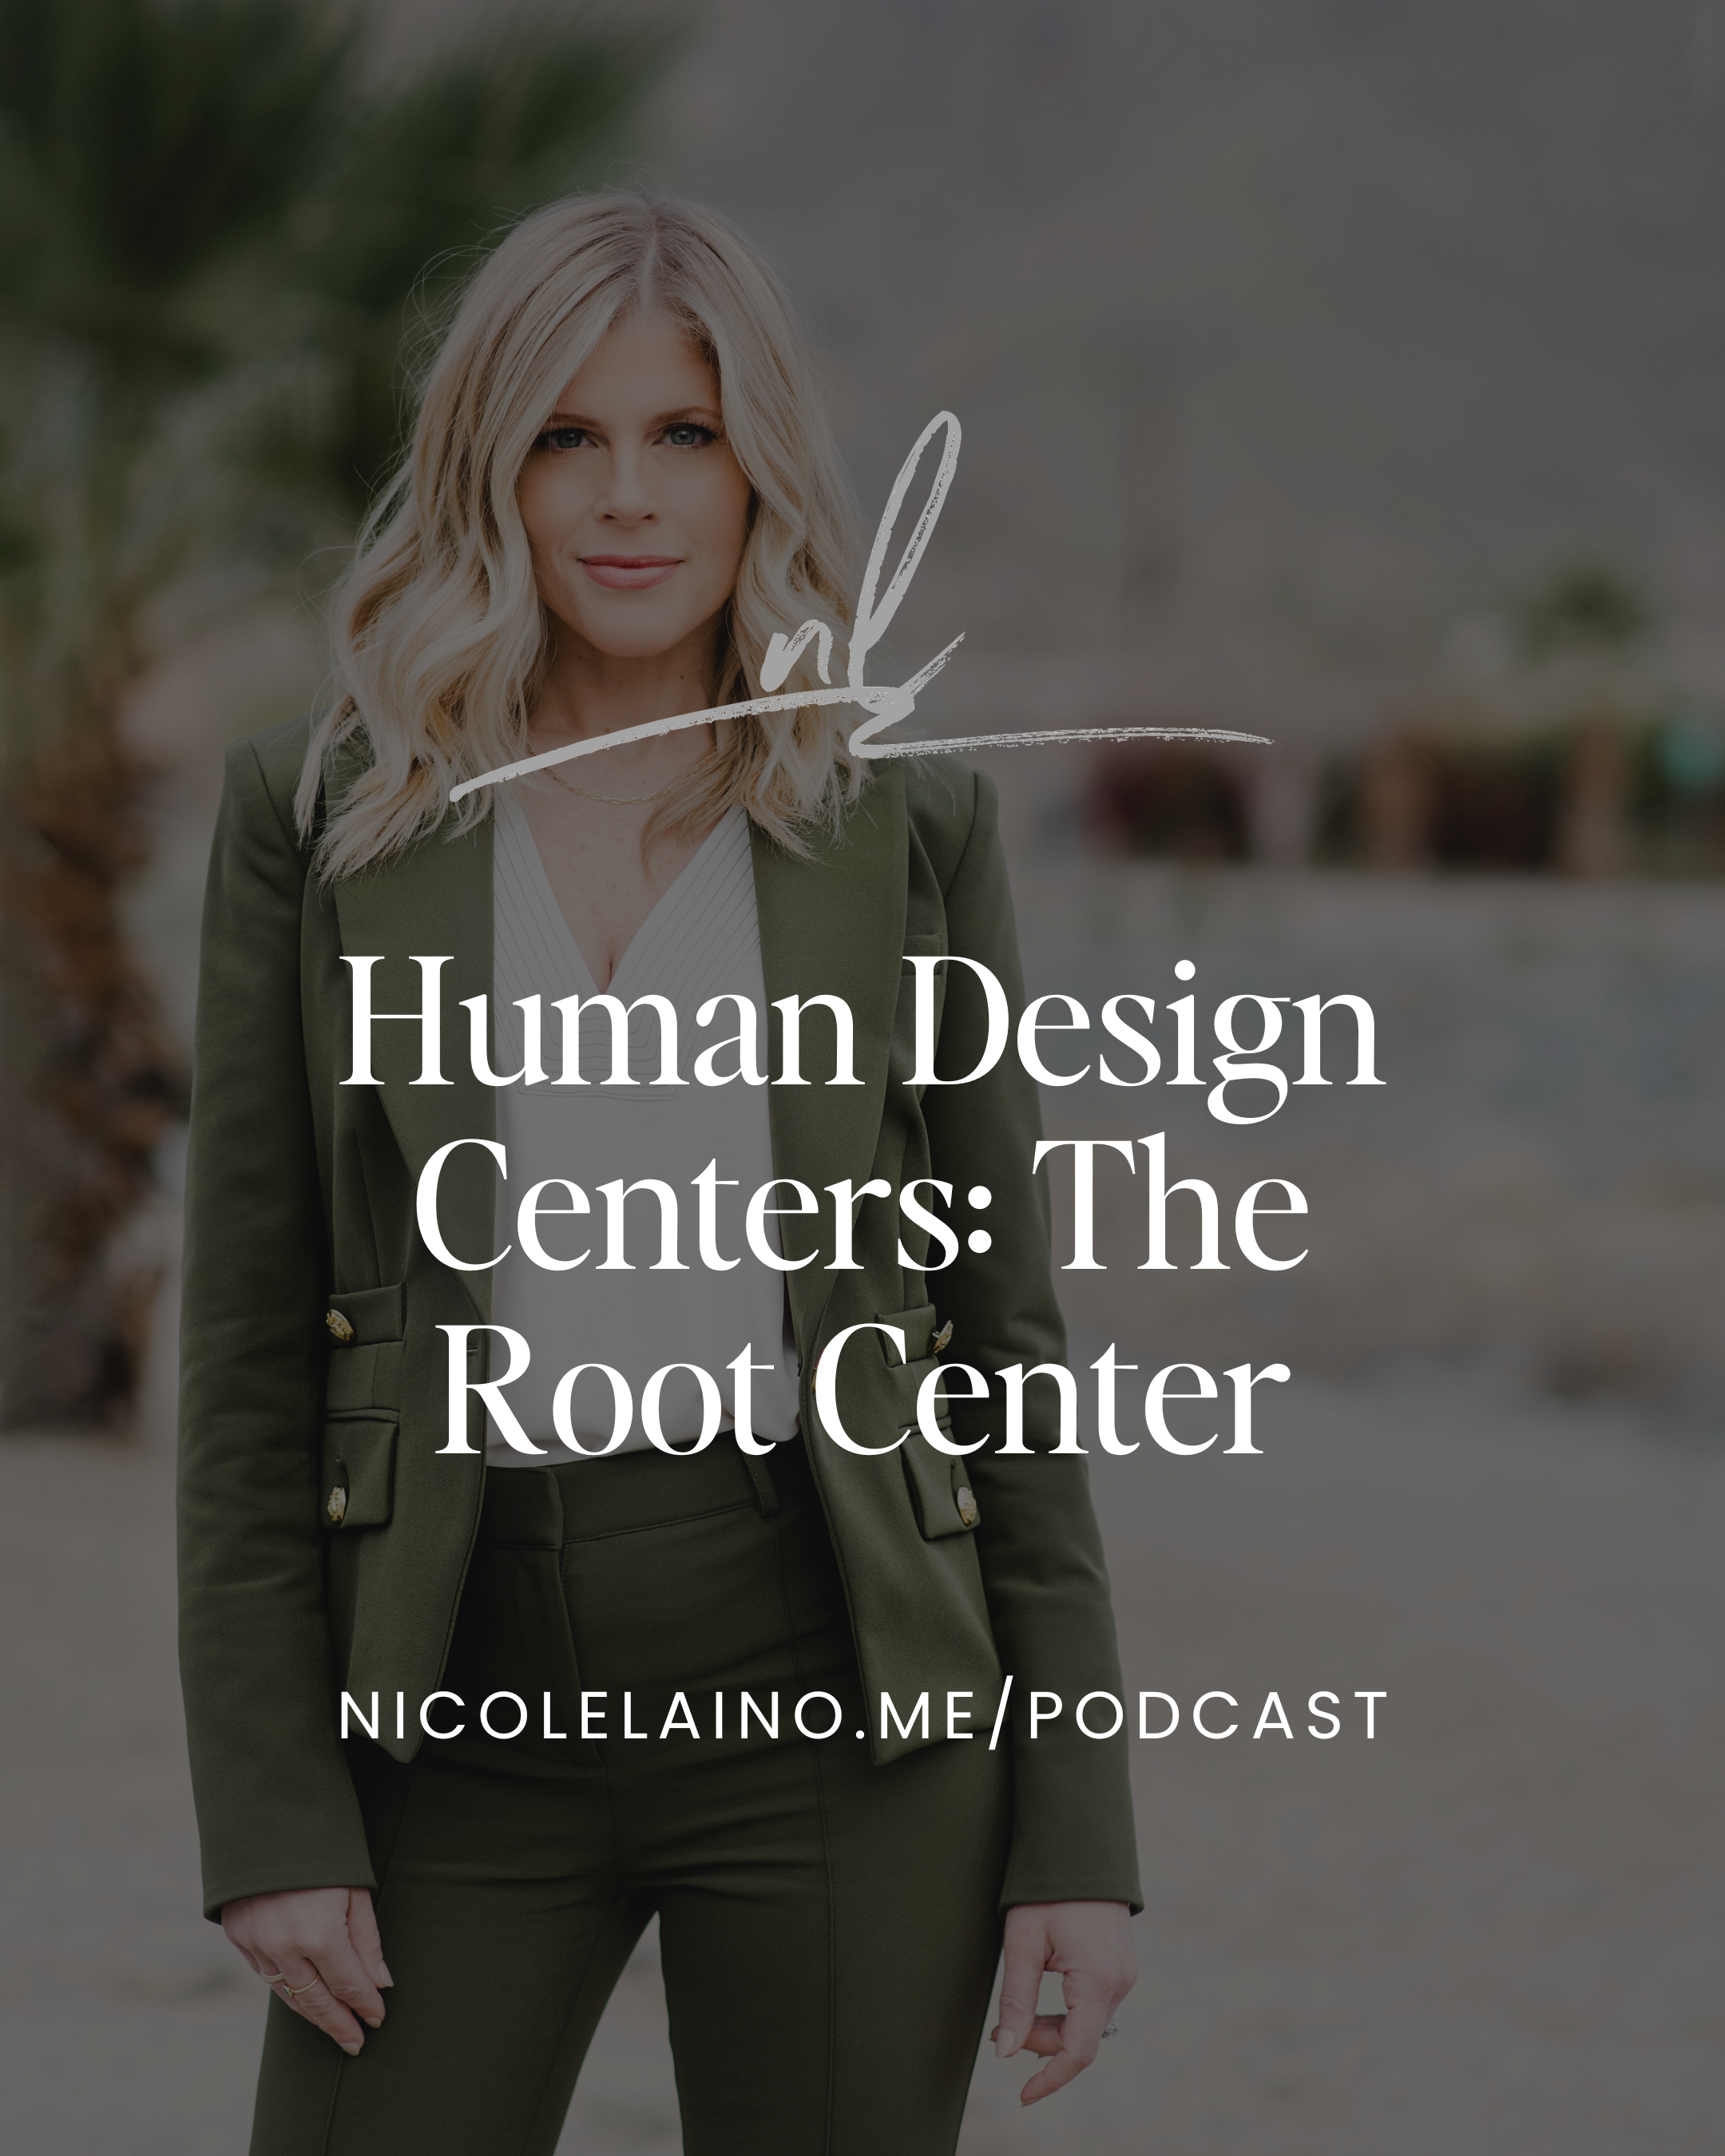 Human Design Centers: The Root Center